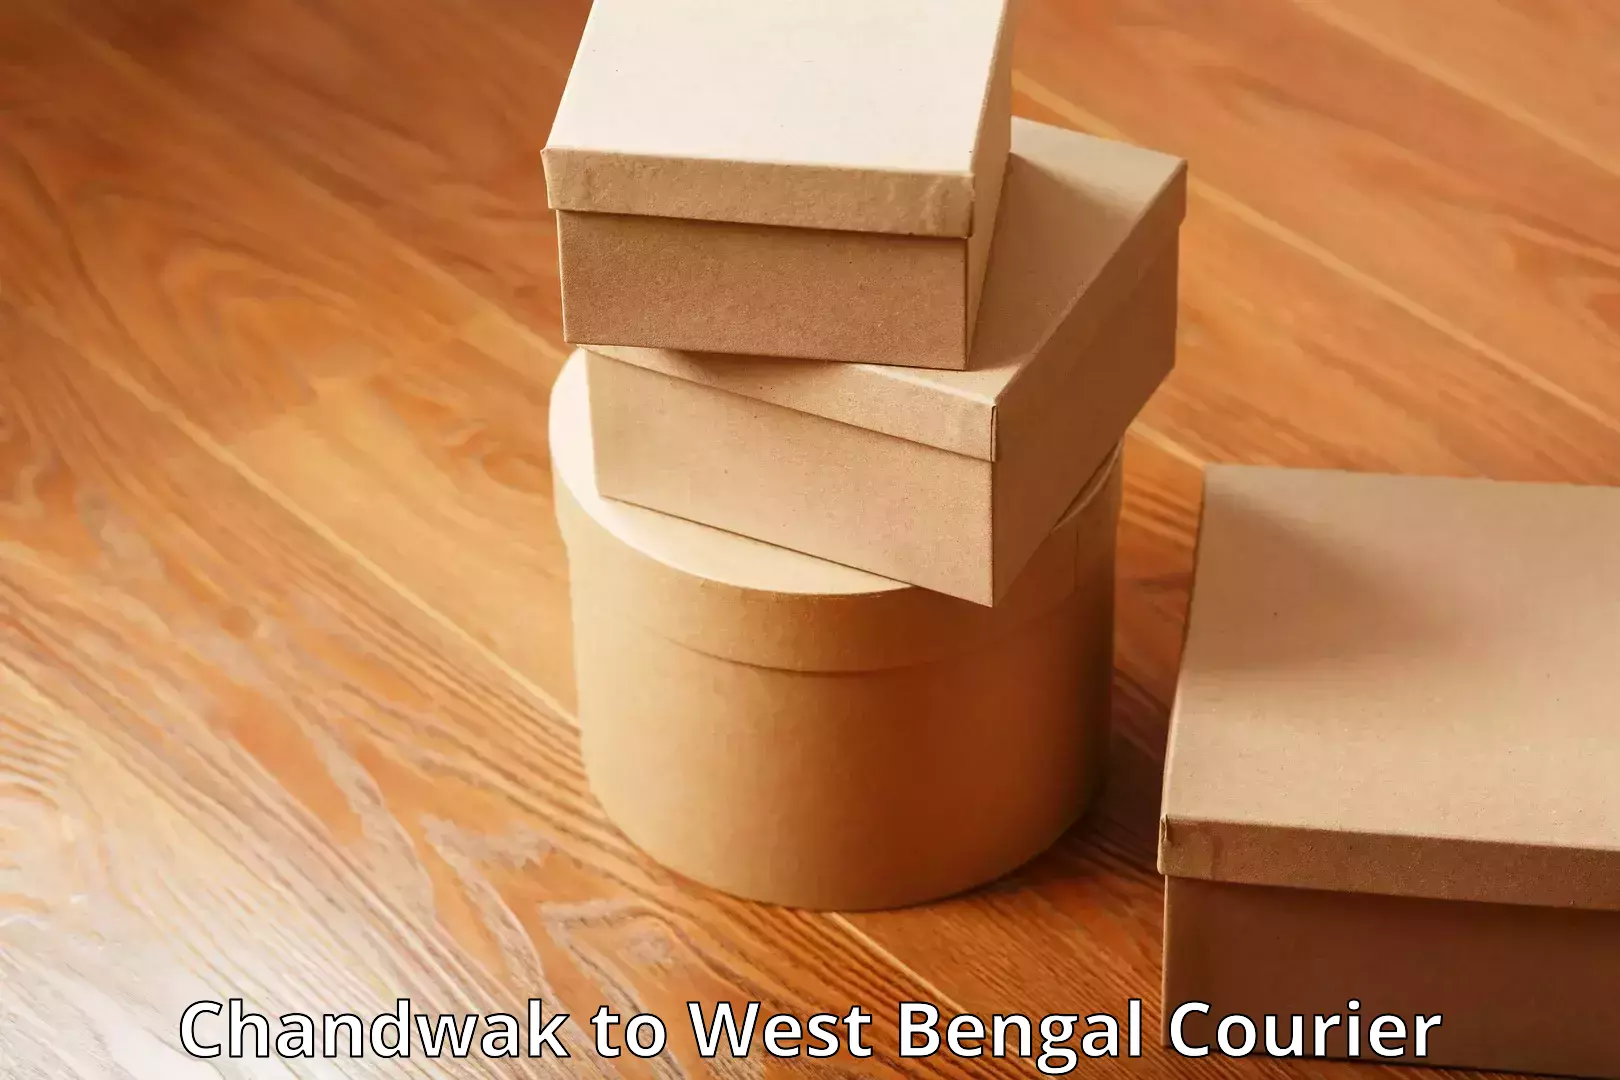 Luggage delivery network Chandwak to West Bengal